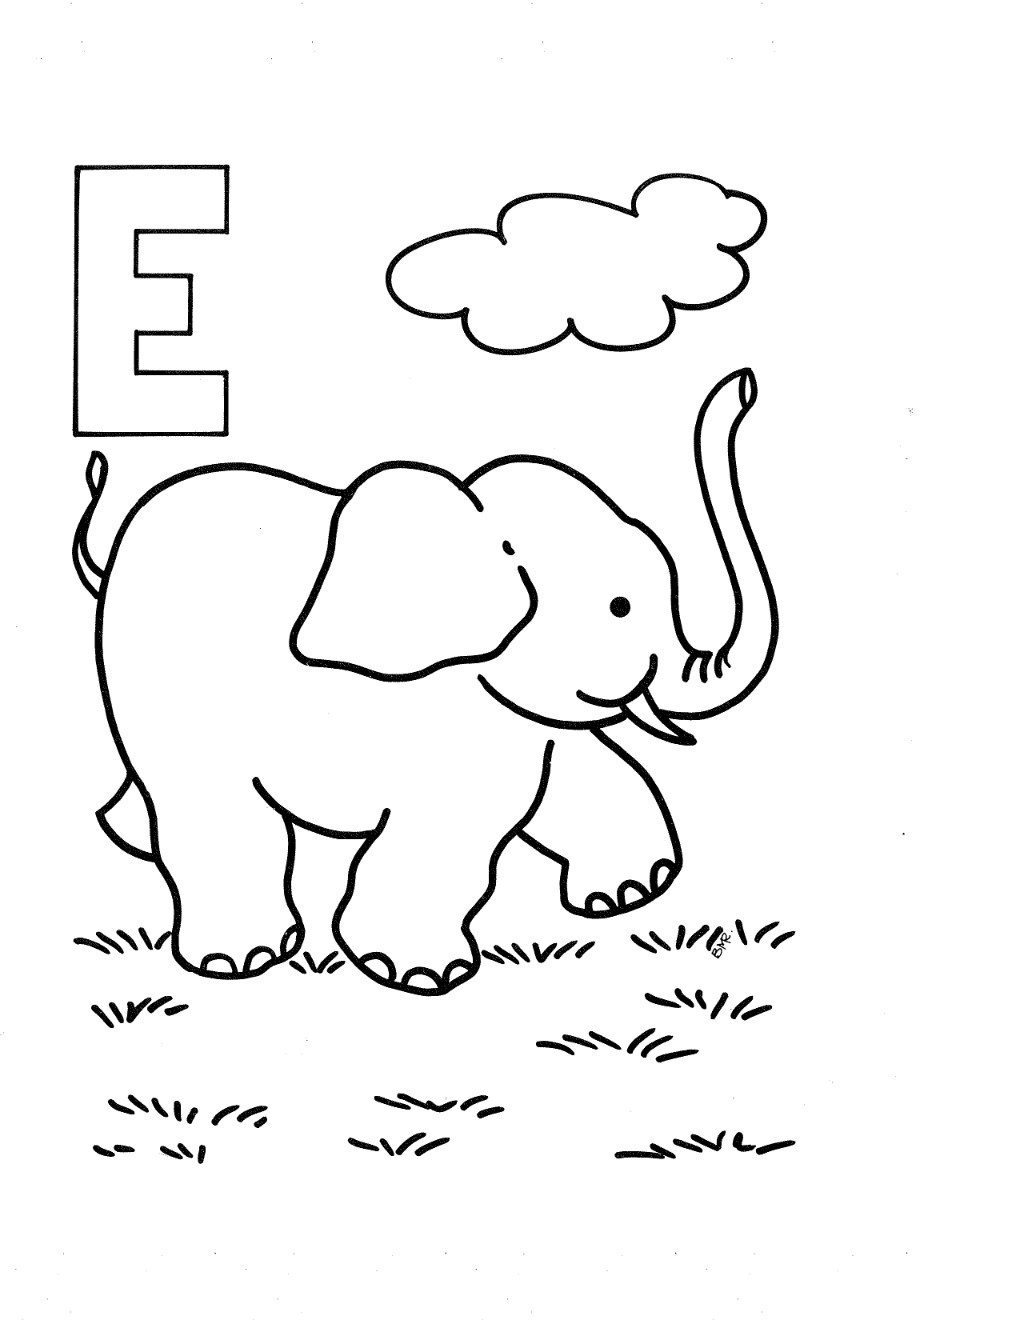 Letter E Coloring Page at GetColorings.com | Free printable colorings